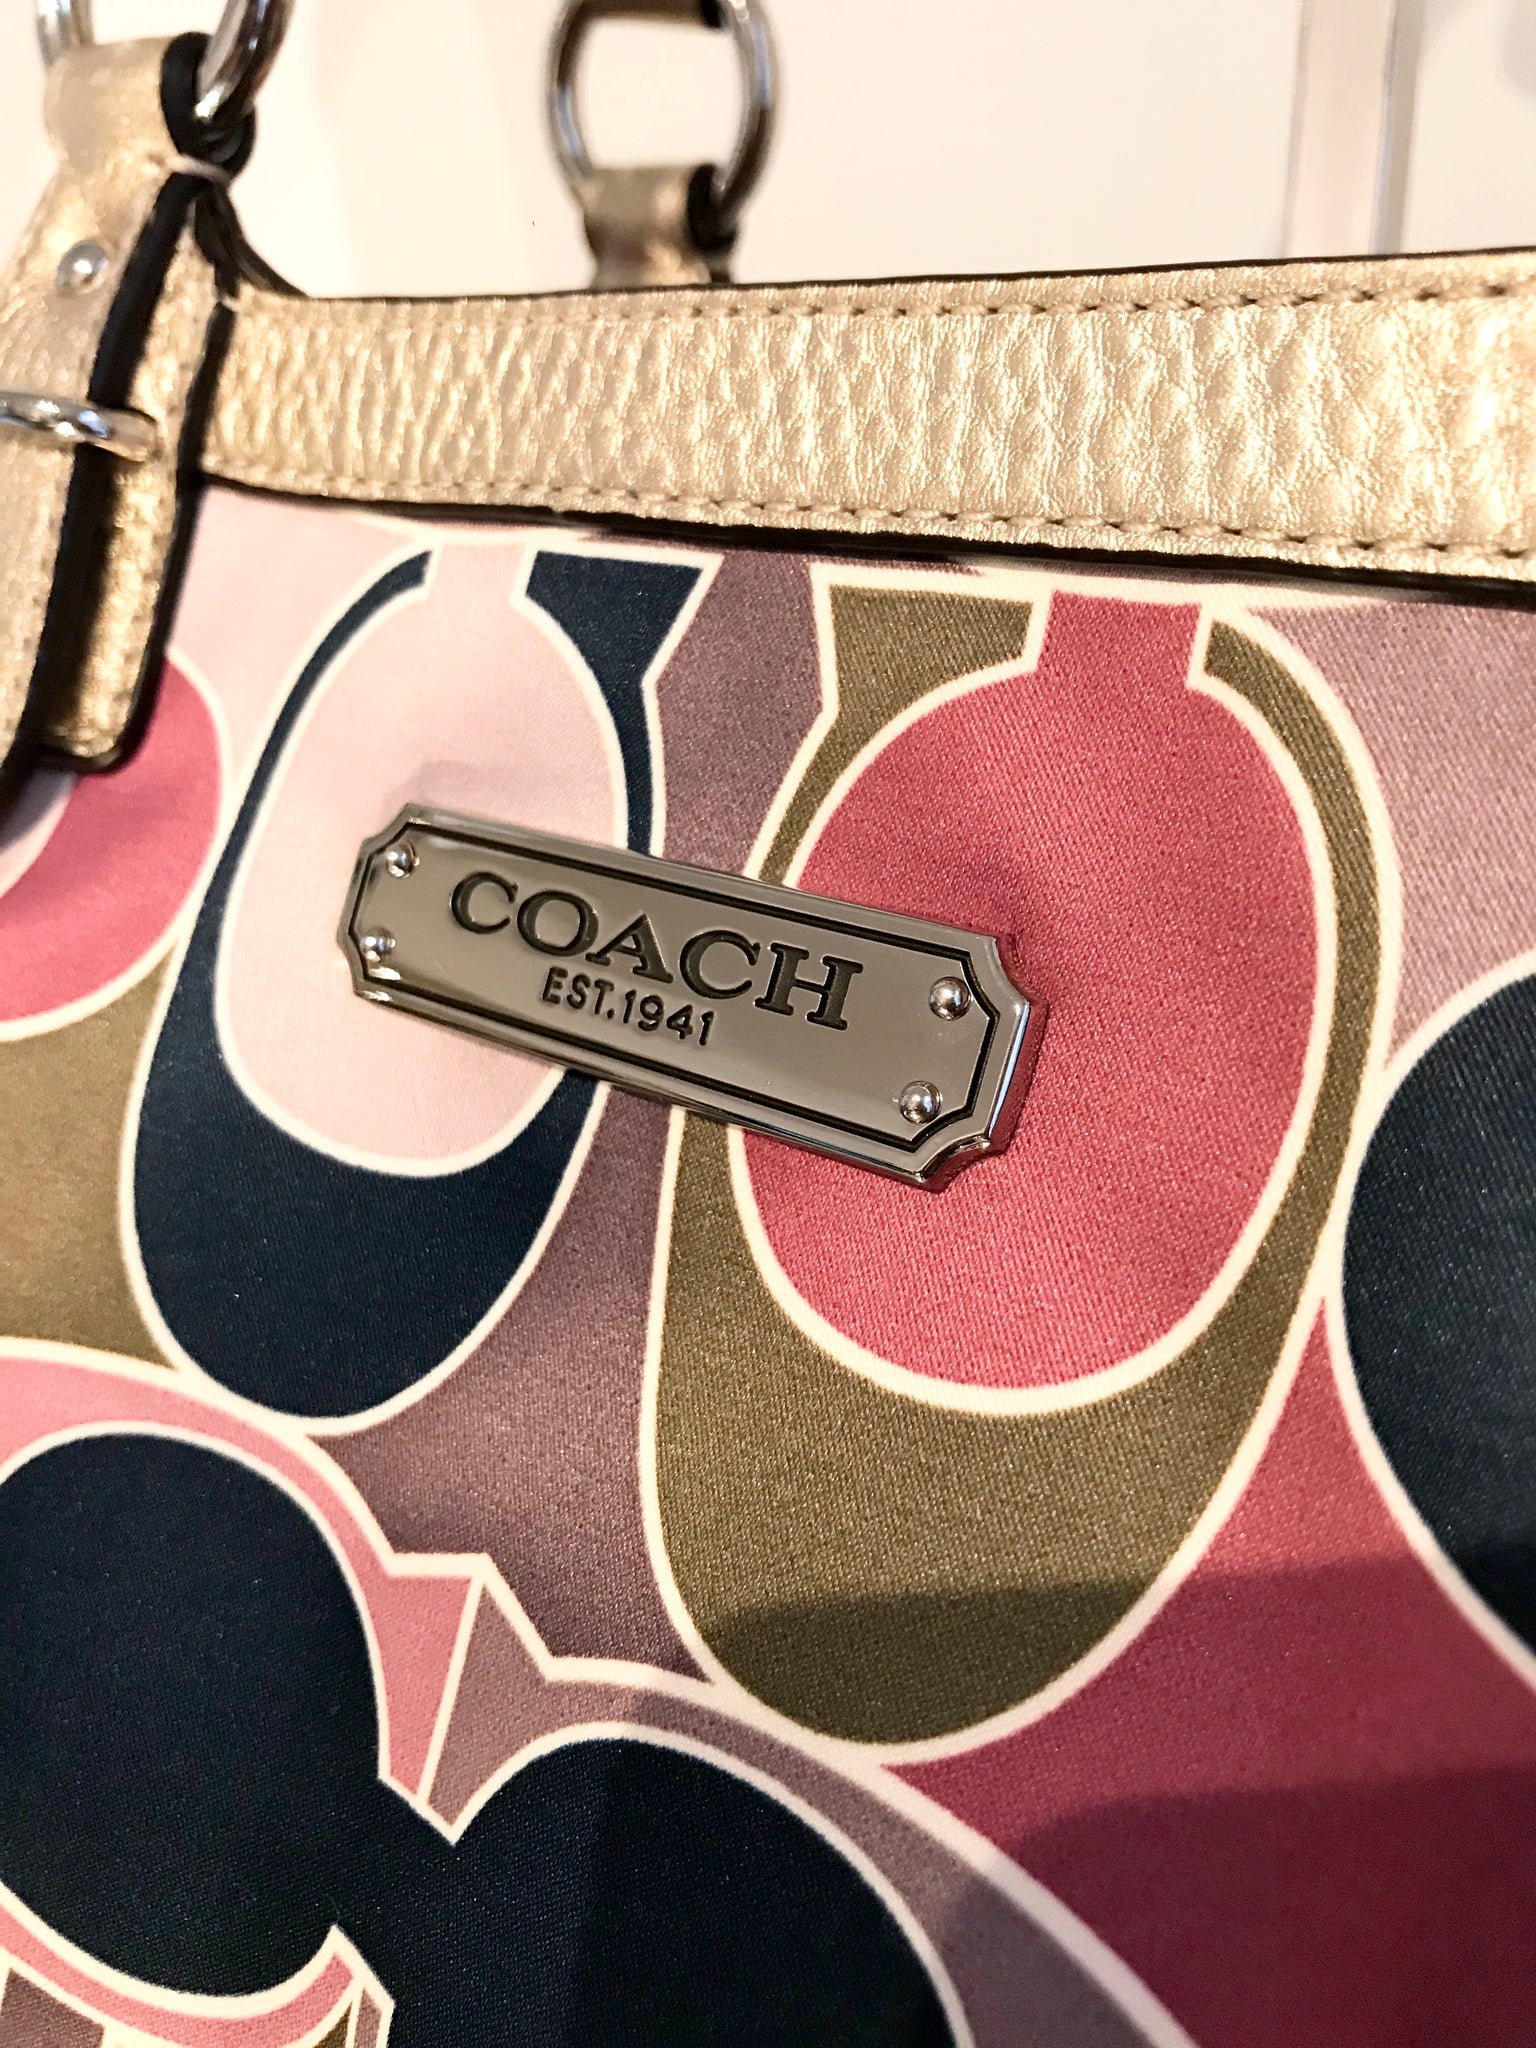 🎀🎀COQUETTE🎀🎀 @coach ITEMS FEATURED : Silk Scarf in Signature Style No.  C8363 Leather Charlotte Chain Shoulder Bag Style No. CL407 Heart… |  Instagram